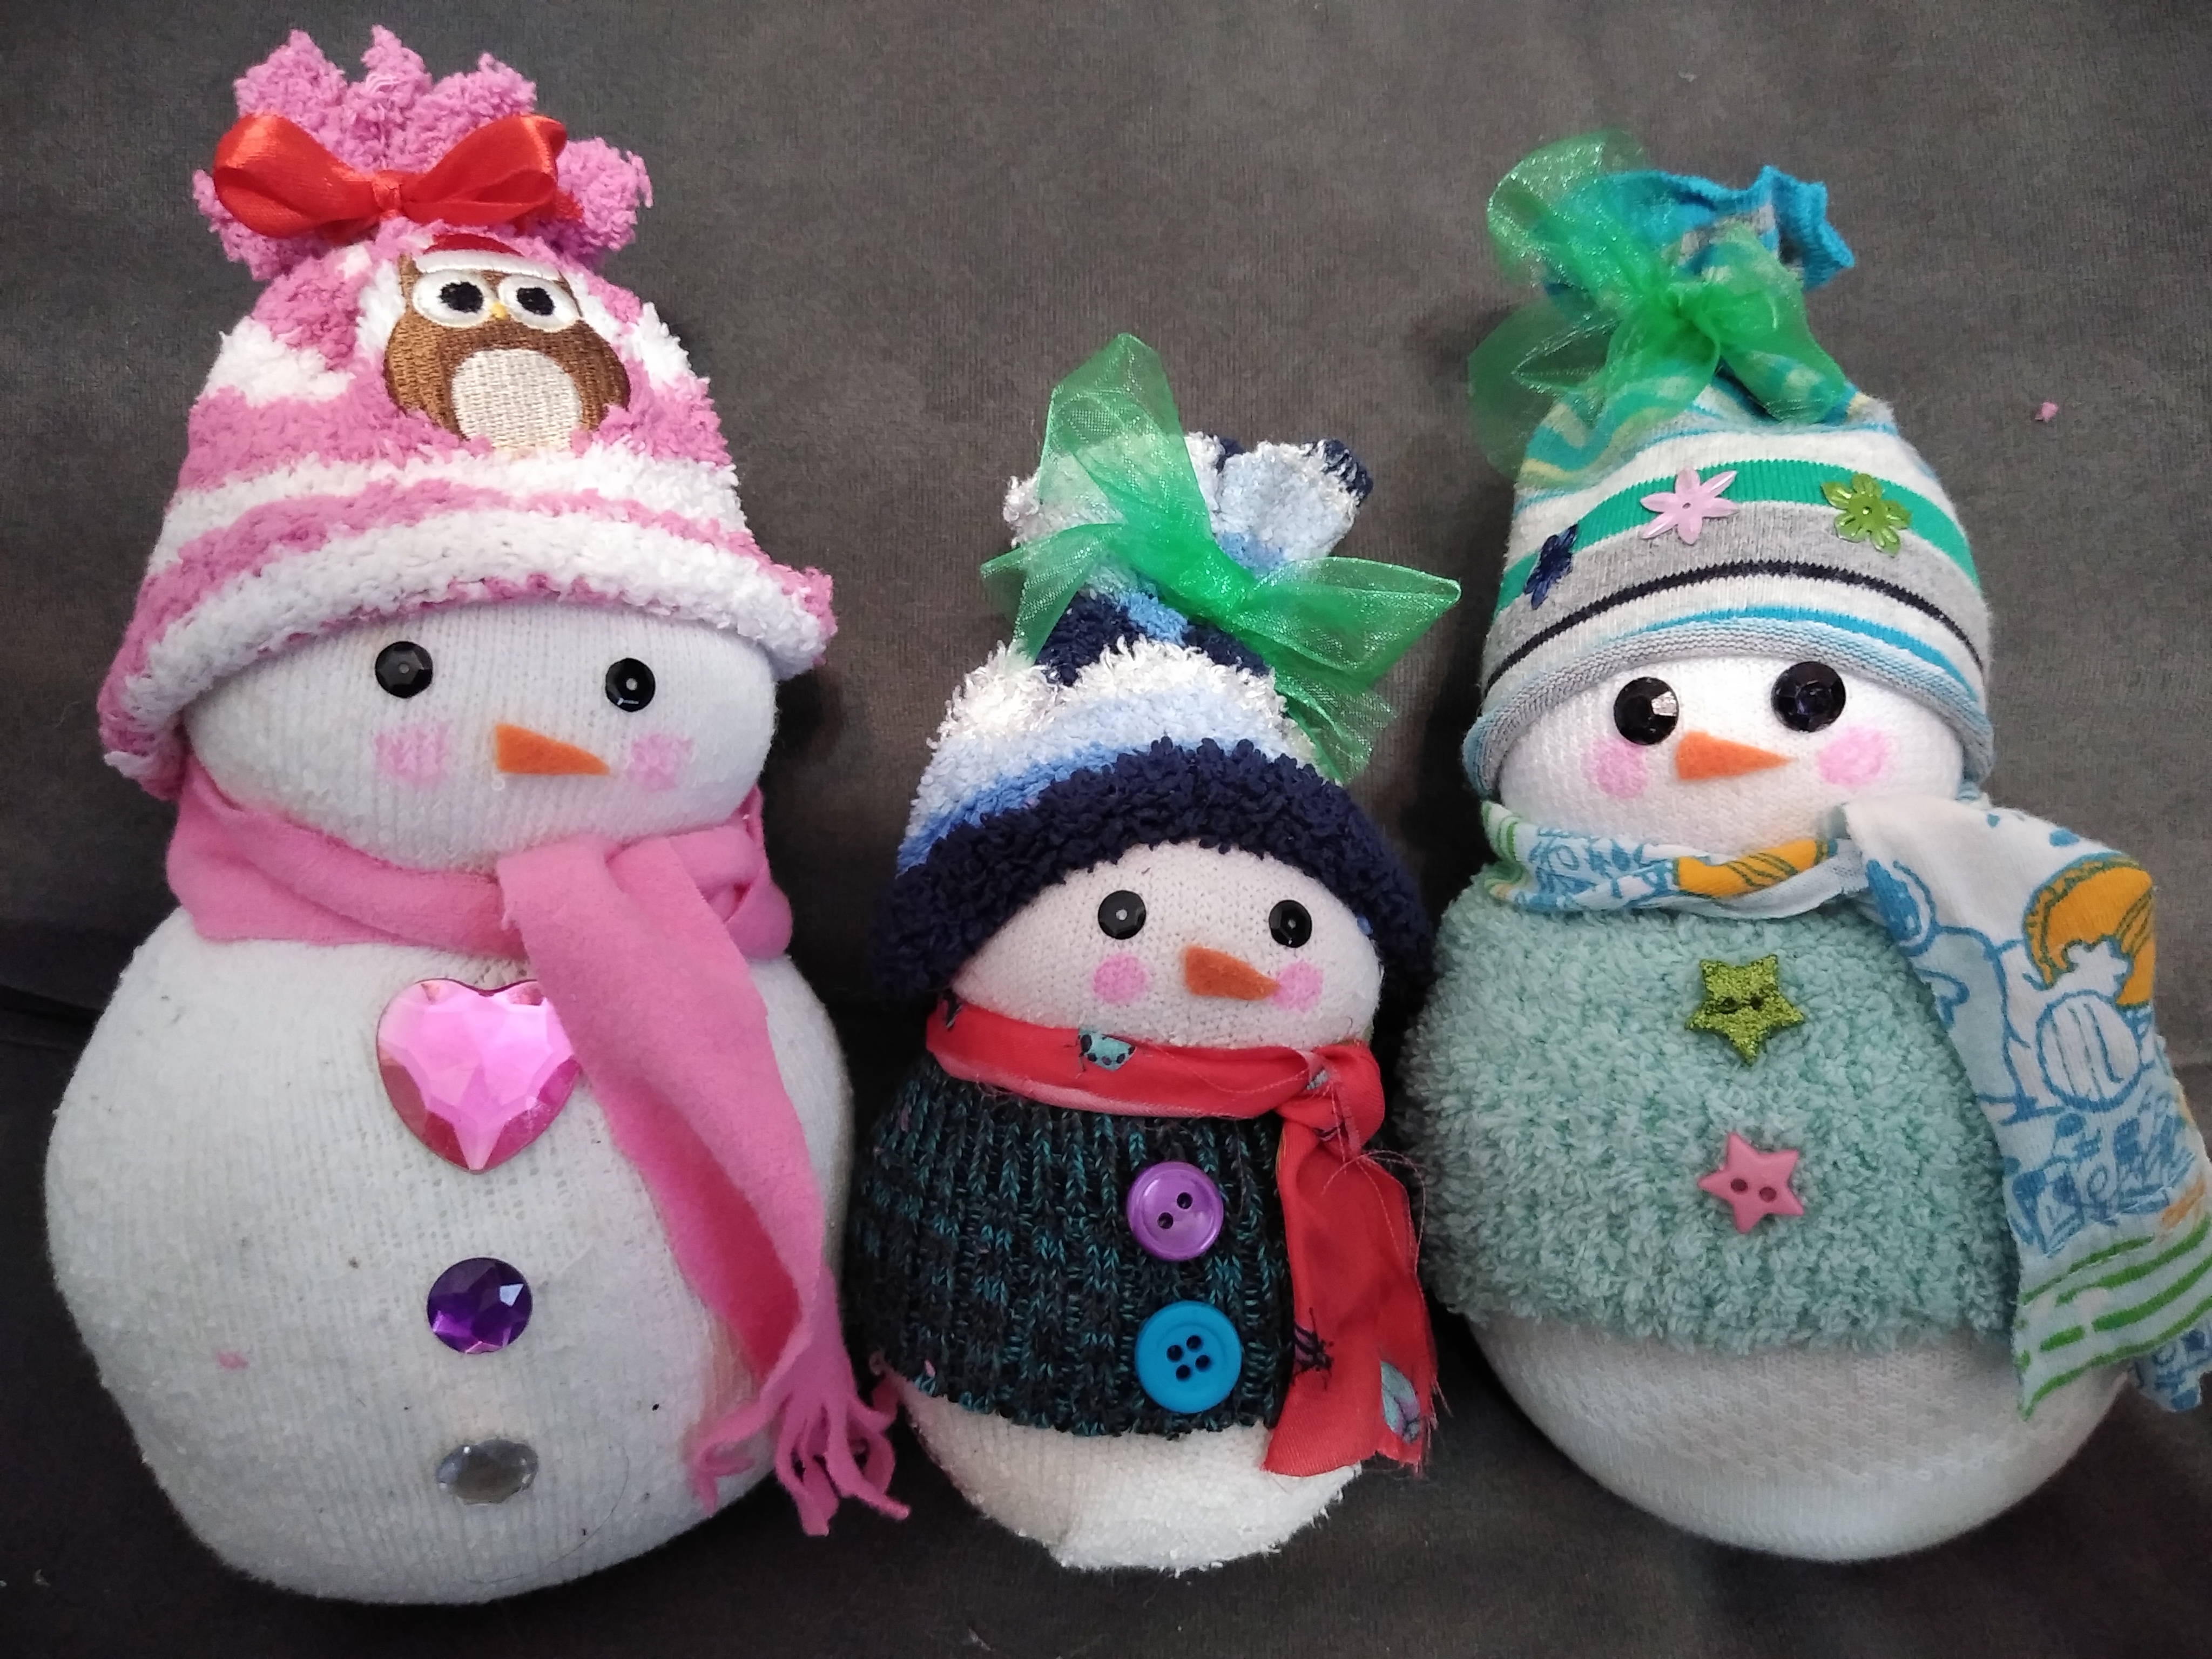 Three snowmen made out of white socks and craft materials.